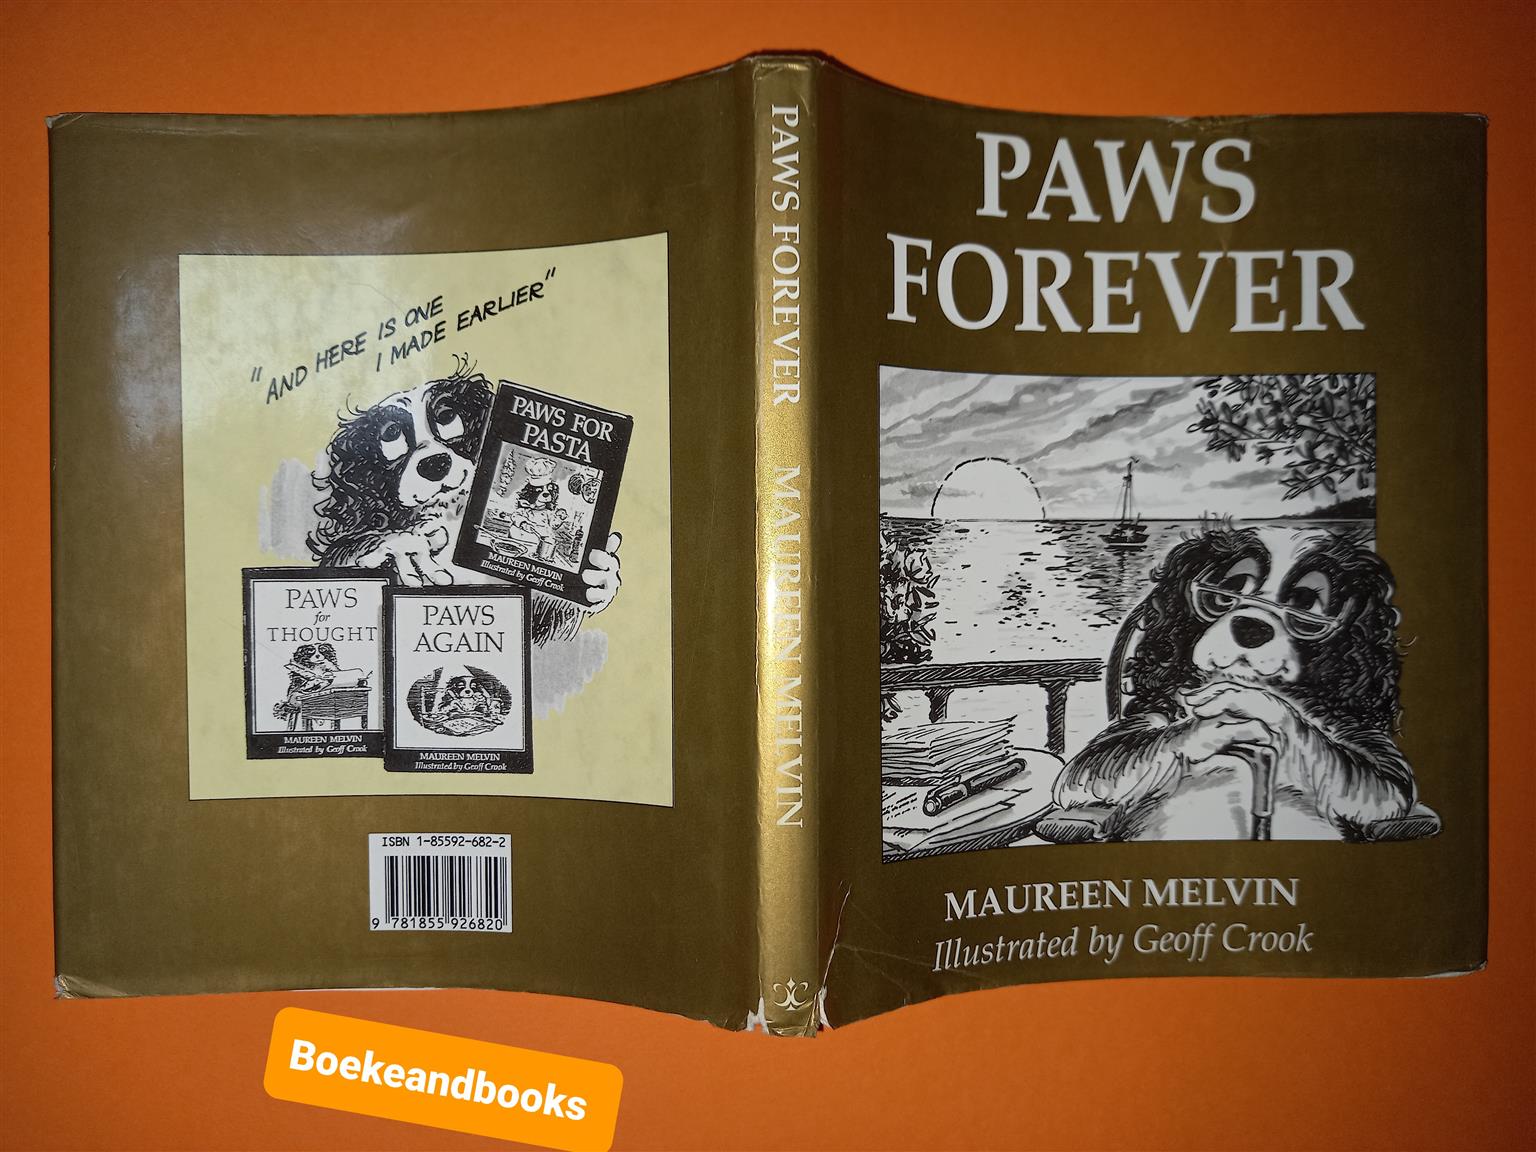 Paws Forever - Maureen Melvin - Illustrated By Geoff Crook. 